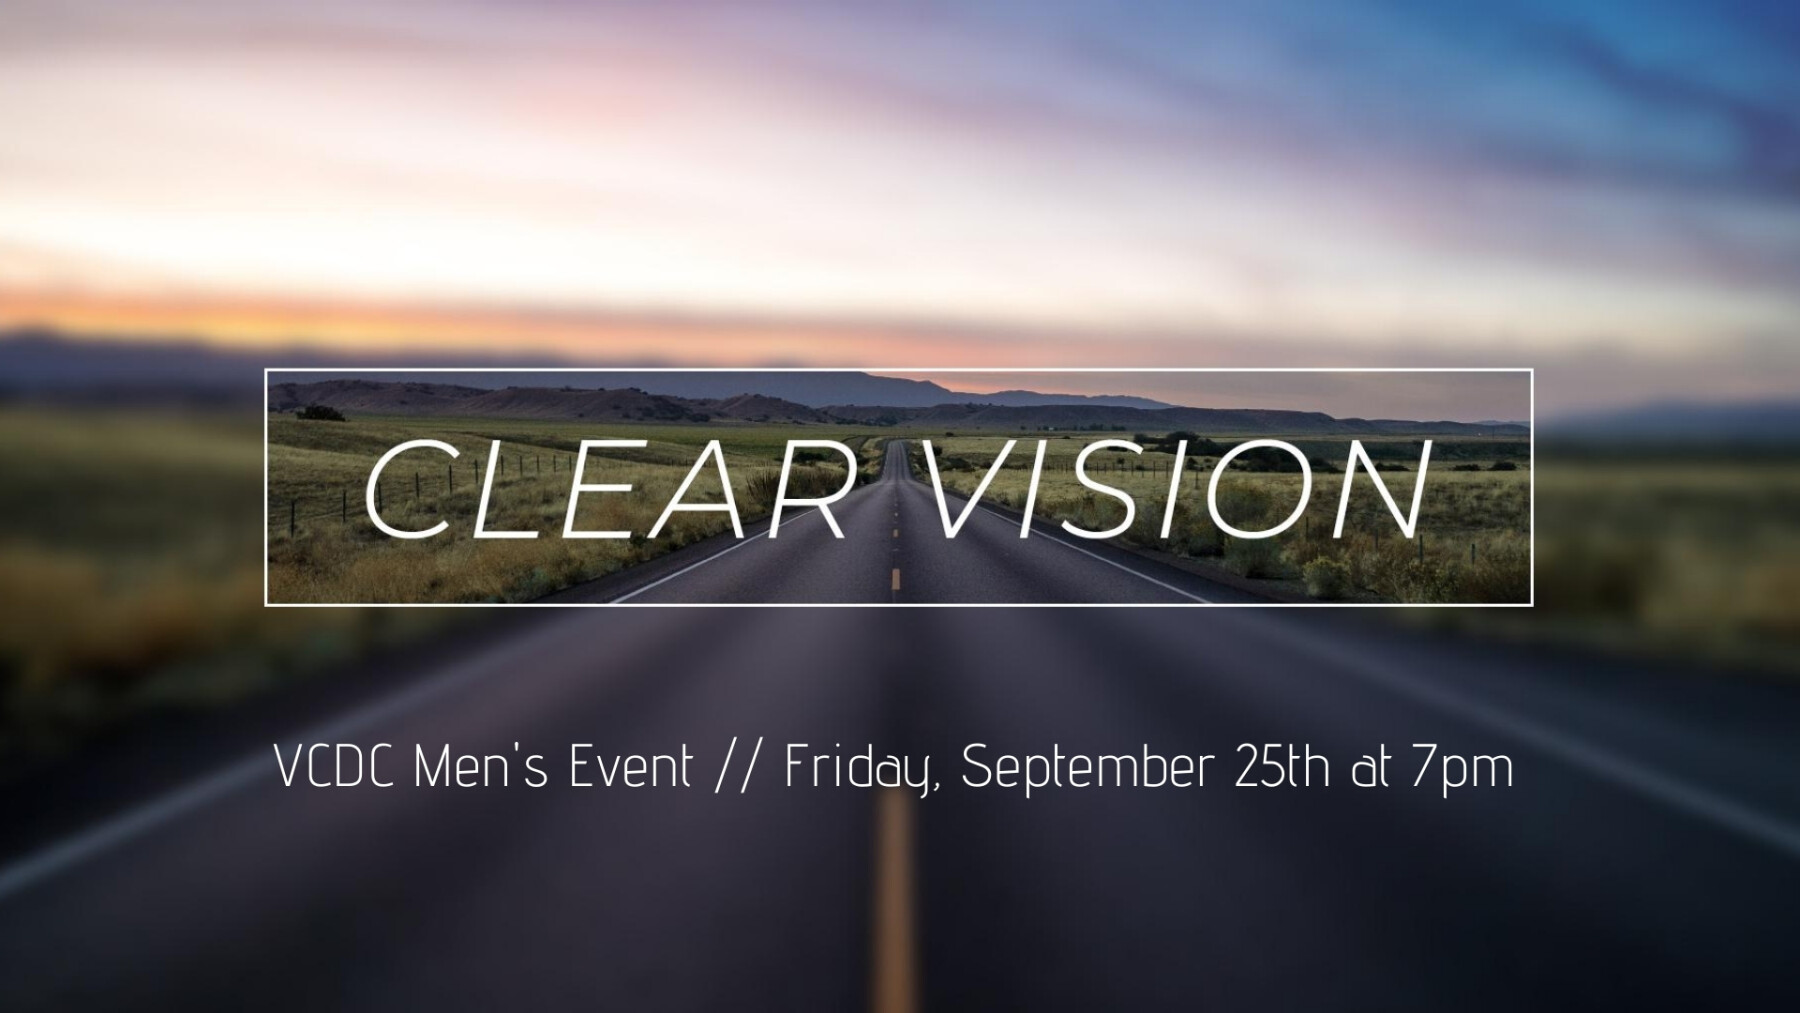 Clear Vision - VCDC Men's Event at 7pm